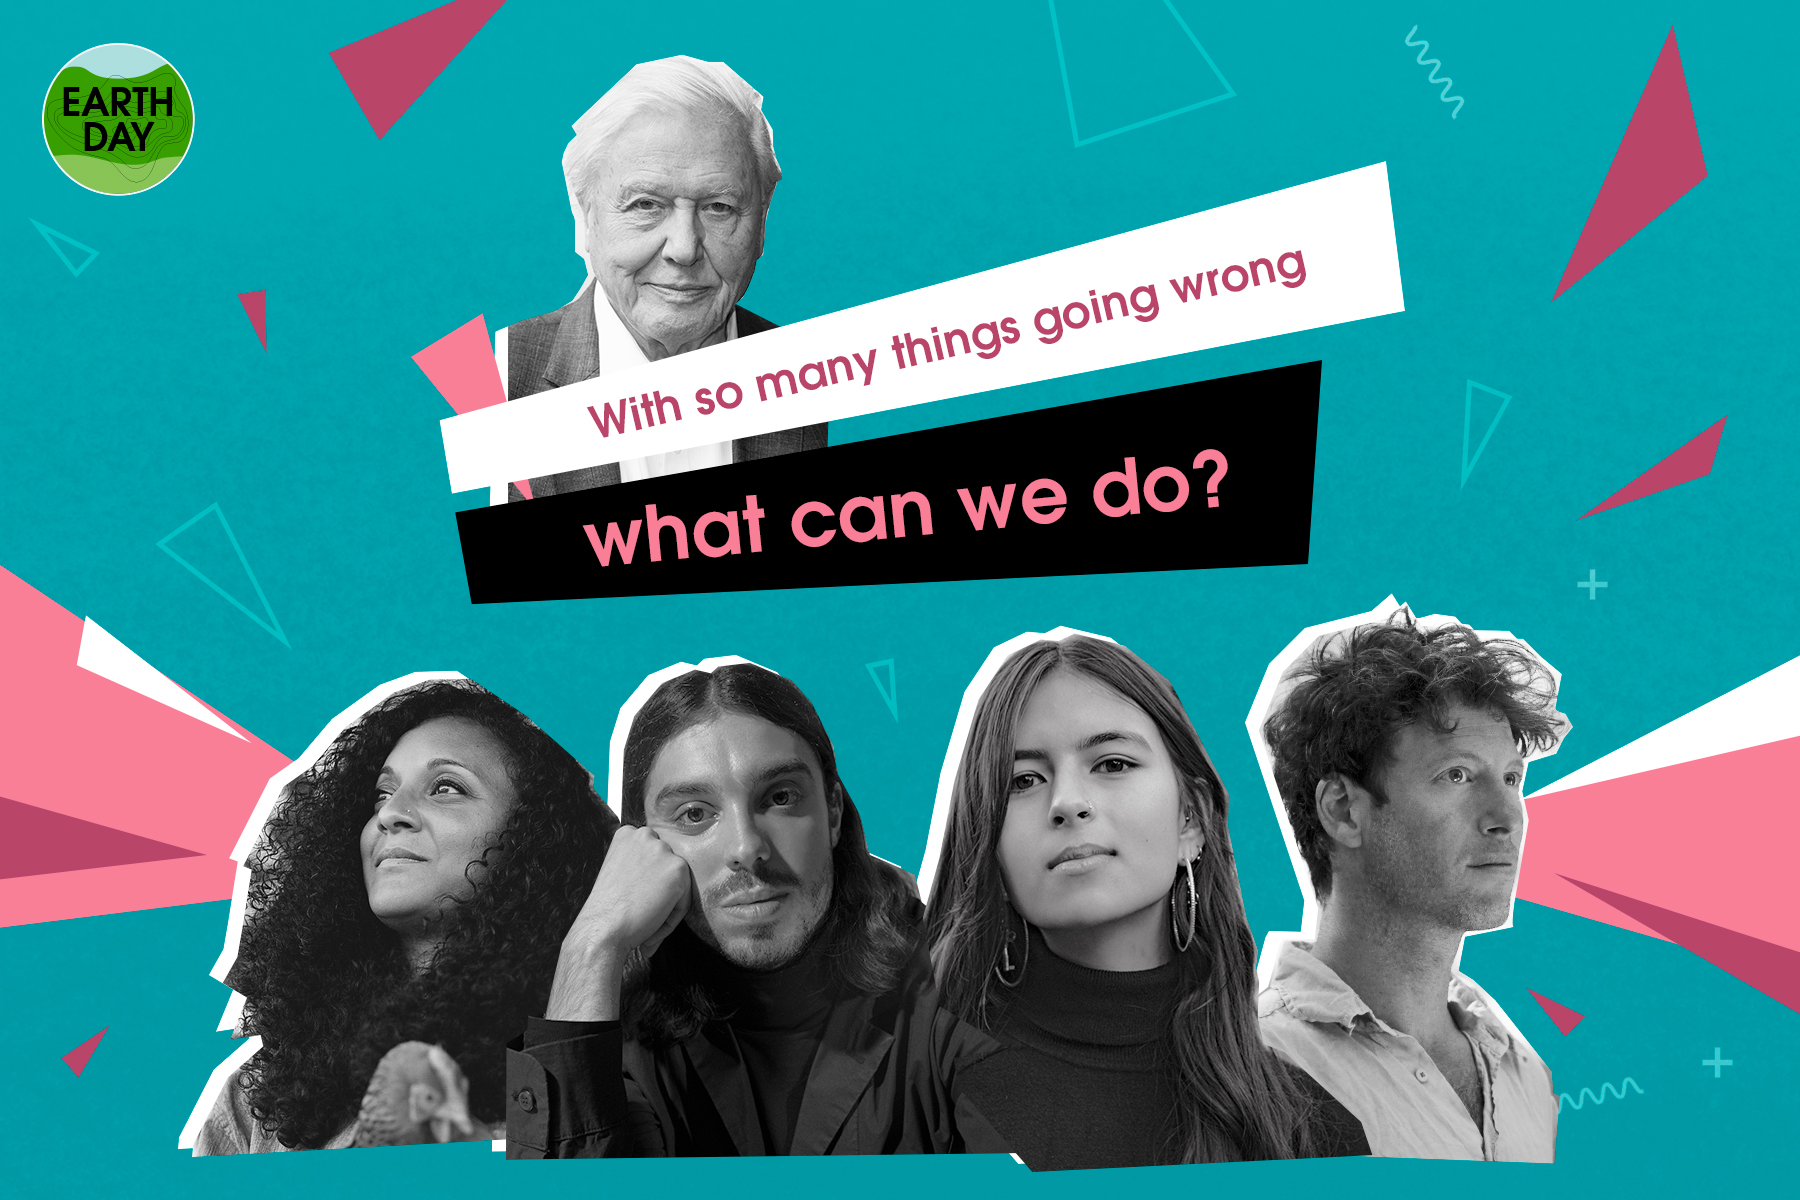 A collage of authors Claire Ratinon, Ed Winters, Mya-Rose Craig and Sam Lee, beneath a photograph of David Attenborough and the words "With so many things going wrong, what can we do?'